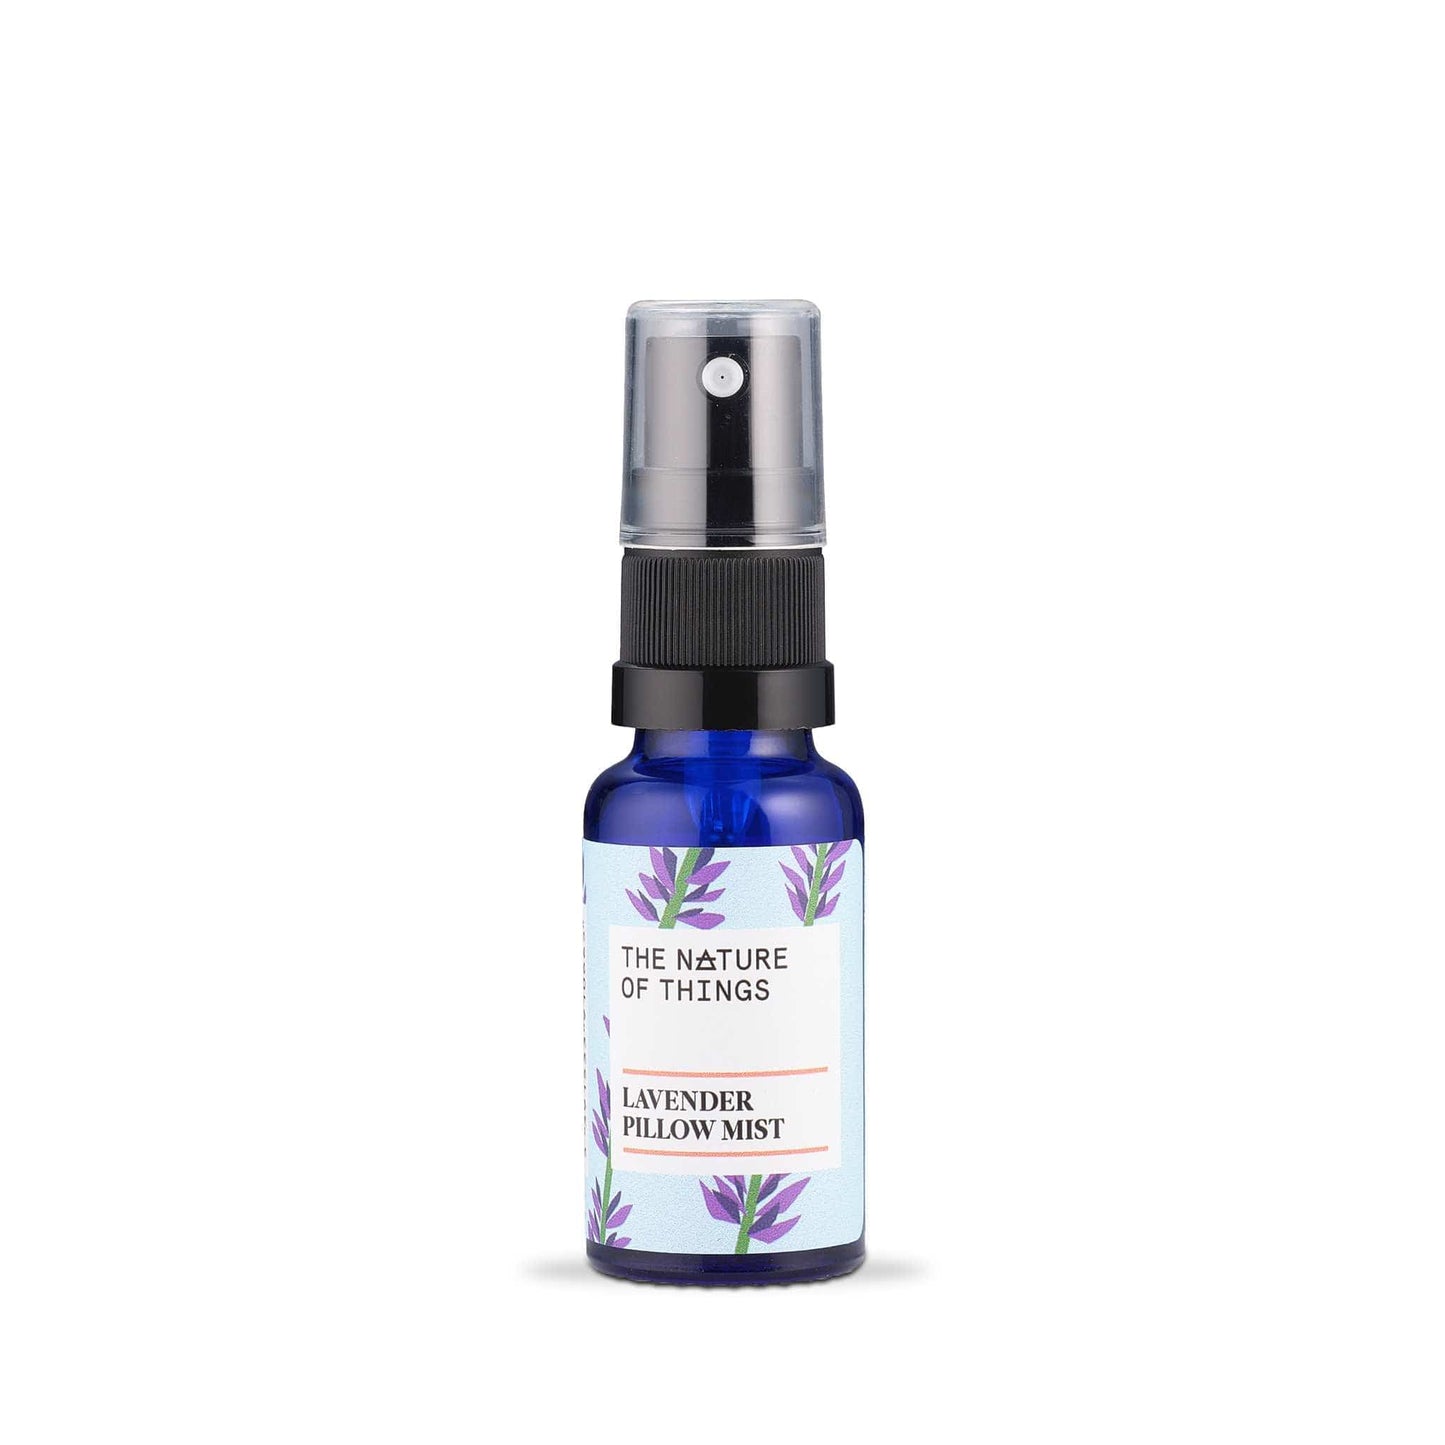 The Nature of Things Essential Oil Lavender Pillow Mist 20ml - The Nature of Things